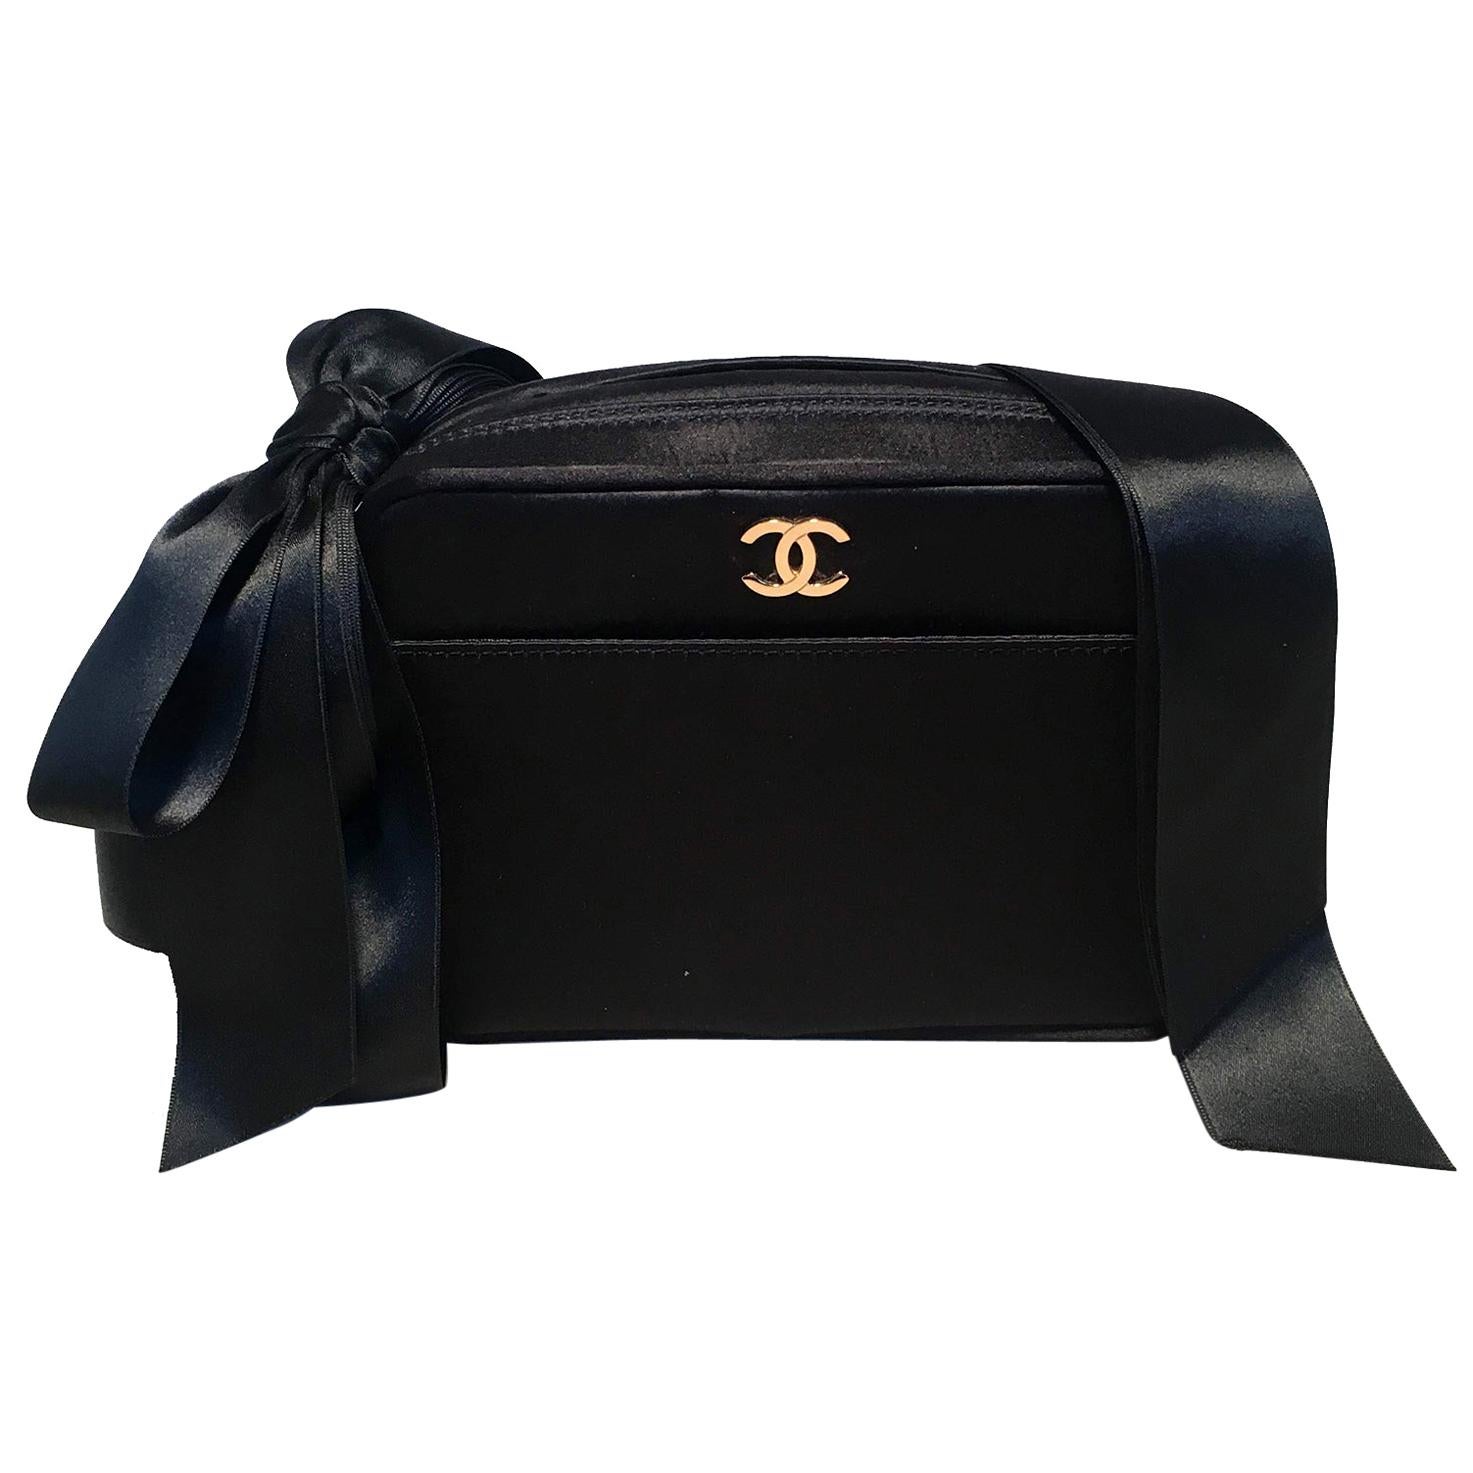 chanel coco top handle sizes